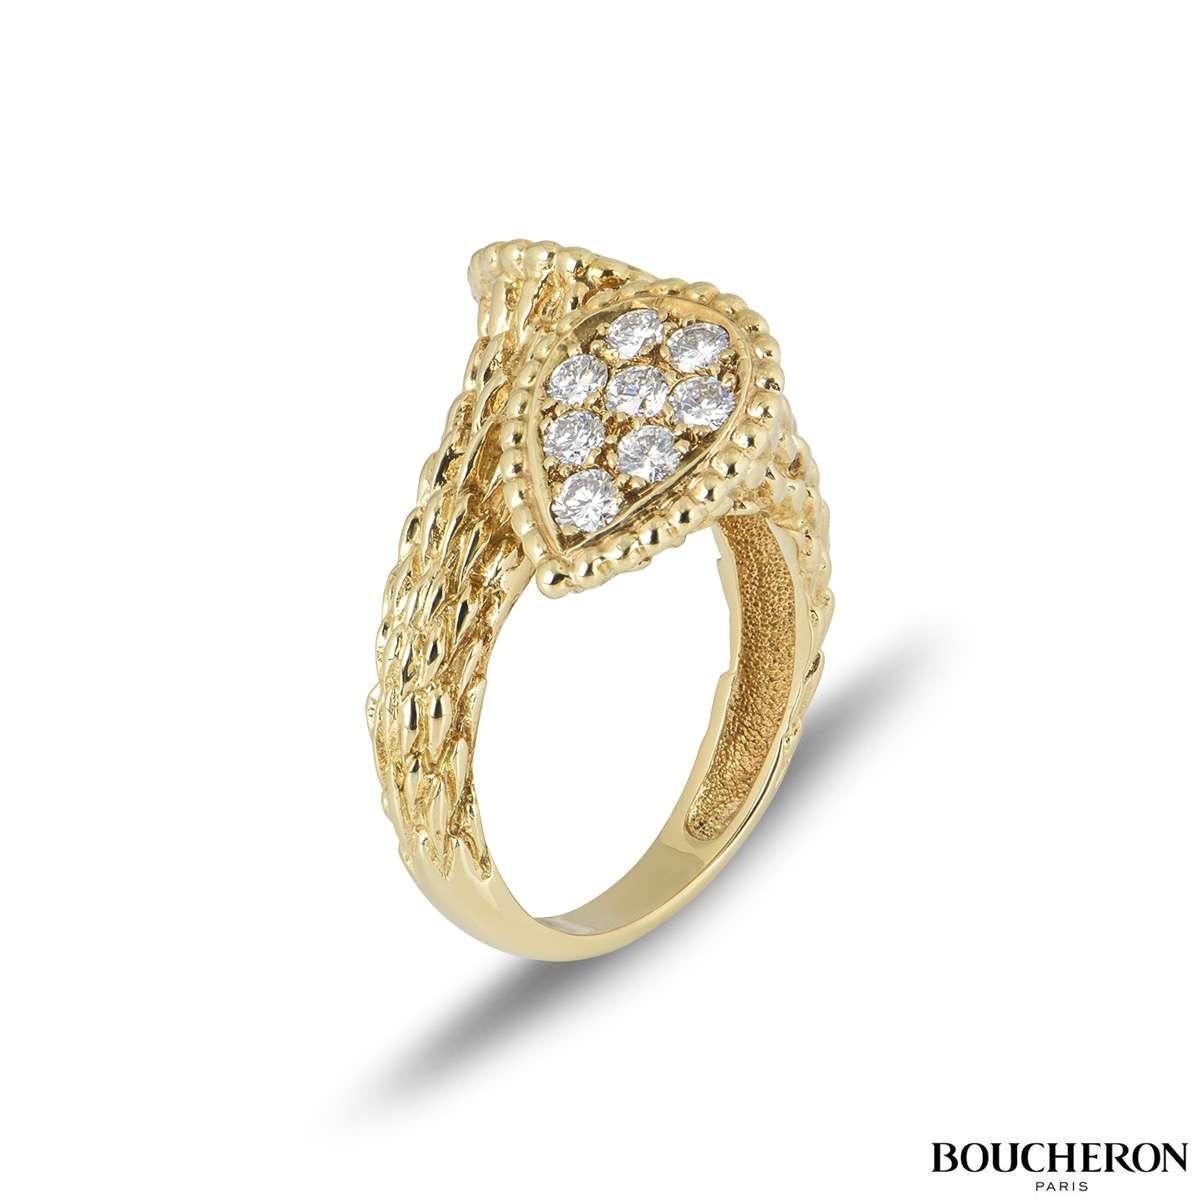 A fabulous 18k yellow gold Boucheron from the Serpent Bohème collection. The ring comprises of a textured ring leading up to two tear drop motifs with beading around the outer edge. There are 16 round brilliant cut diamonds with a total weight of